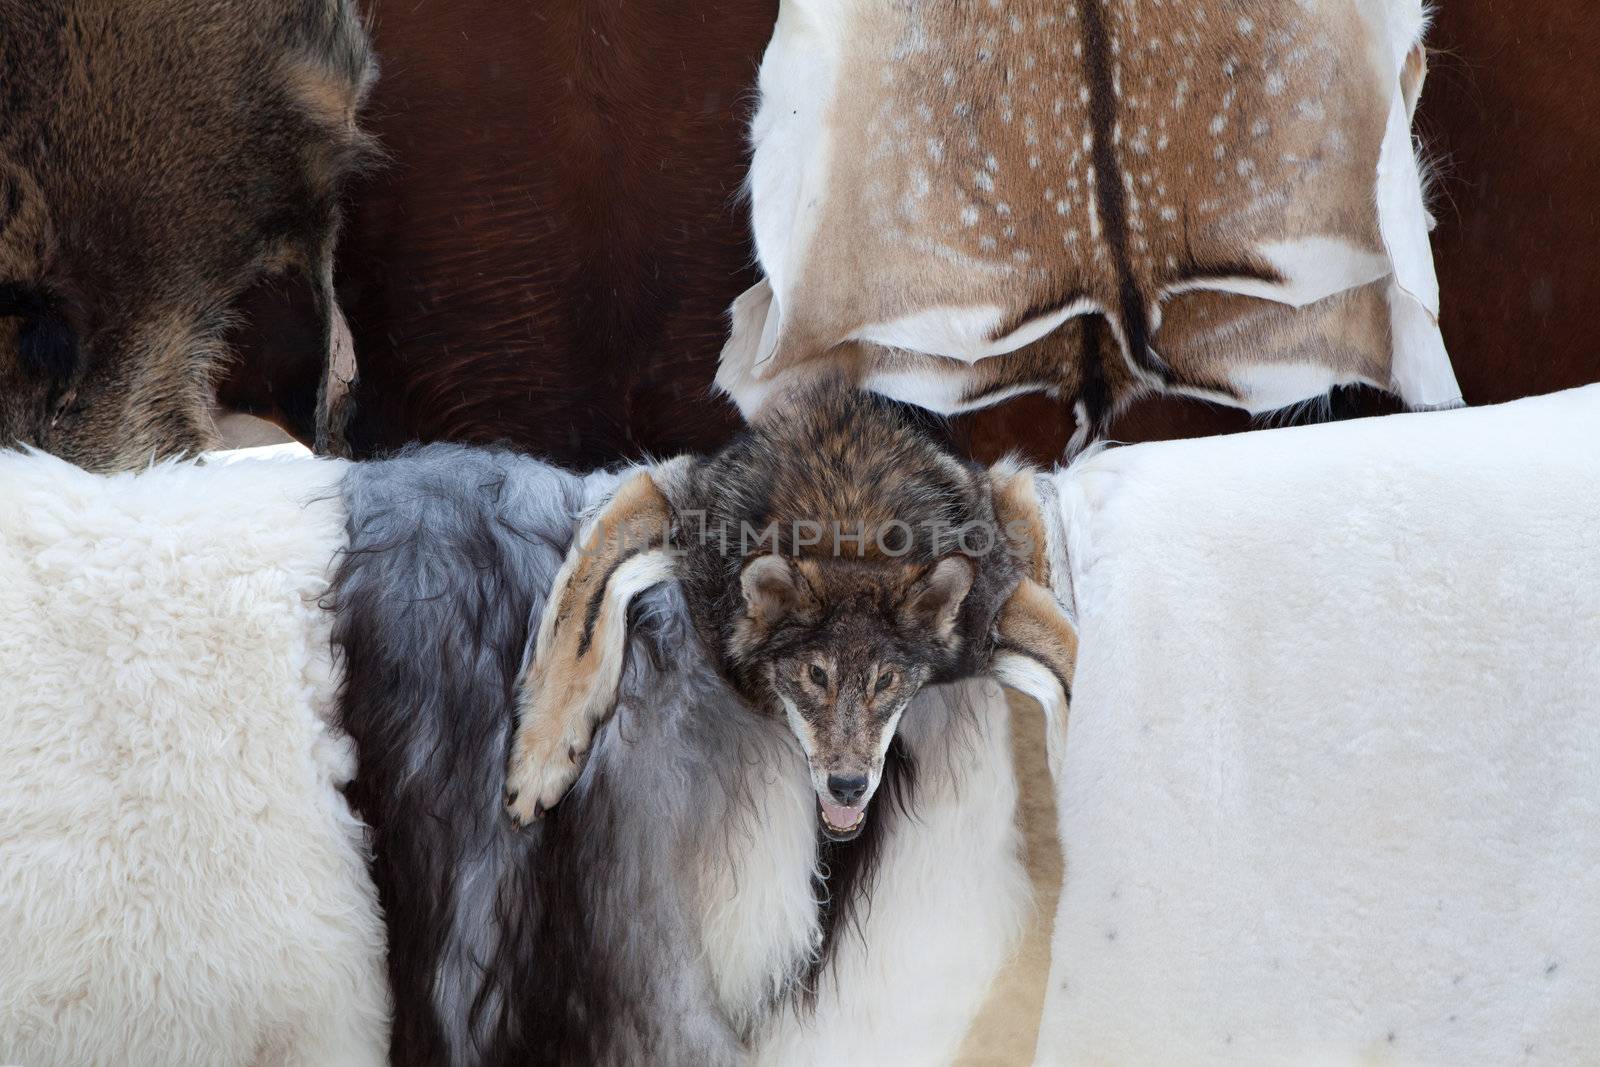 Wild animal fur skins of killed deers, goats and wolf head selling at craft market